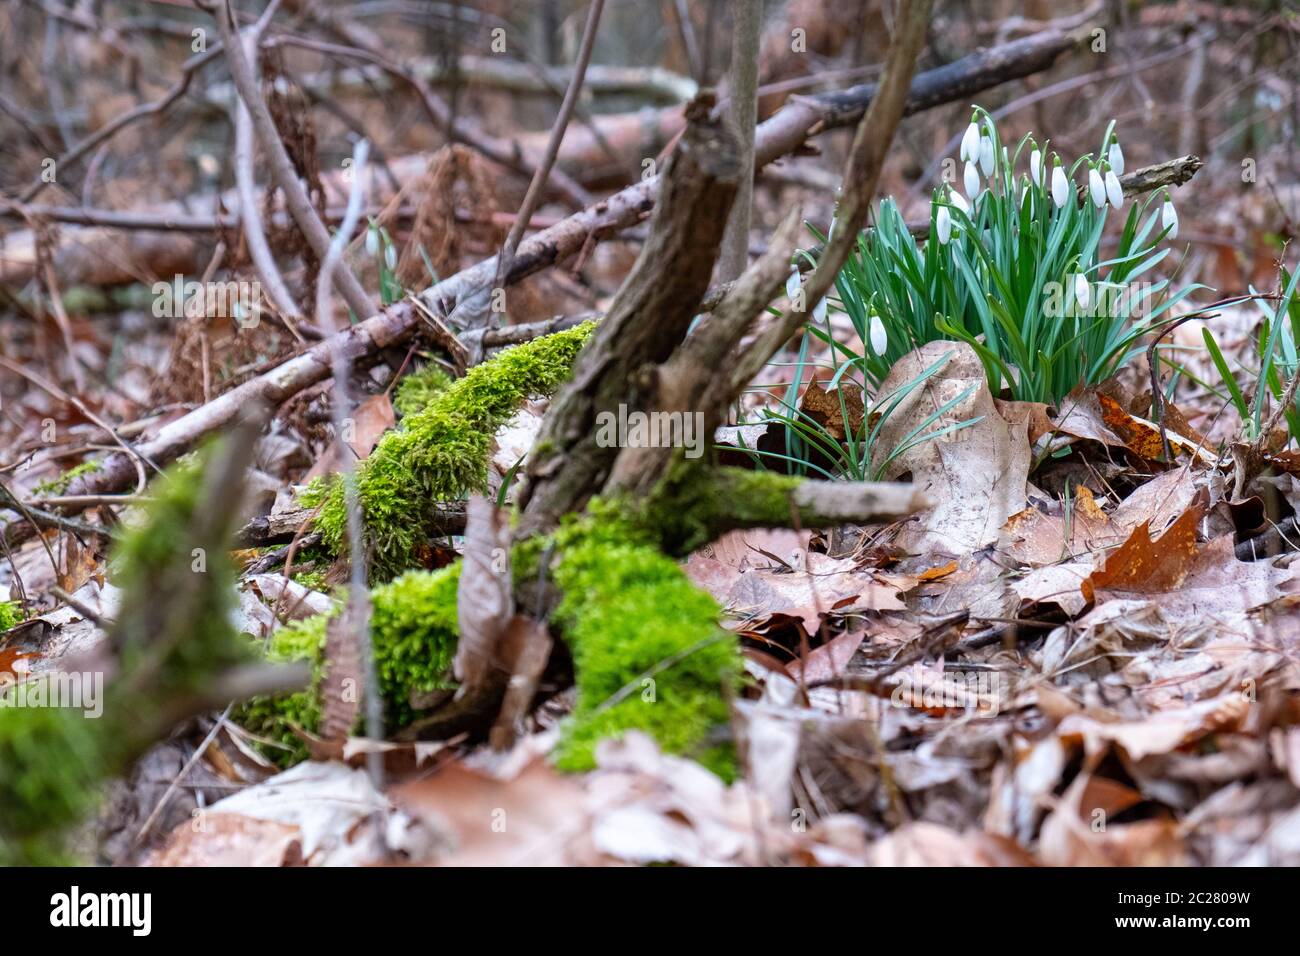 Snowflakes in the forest between moss, leaves and broken branches. Stock Photo